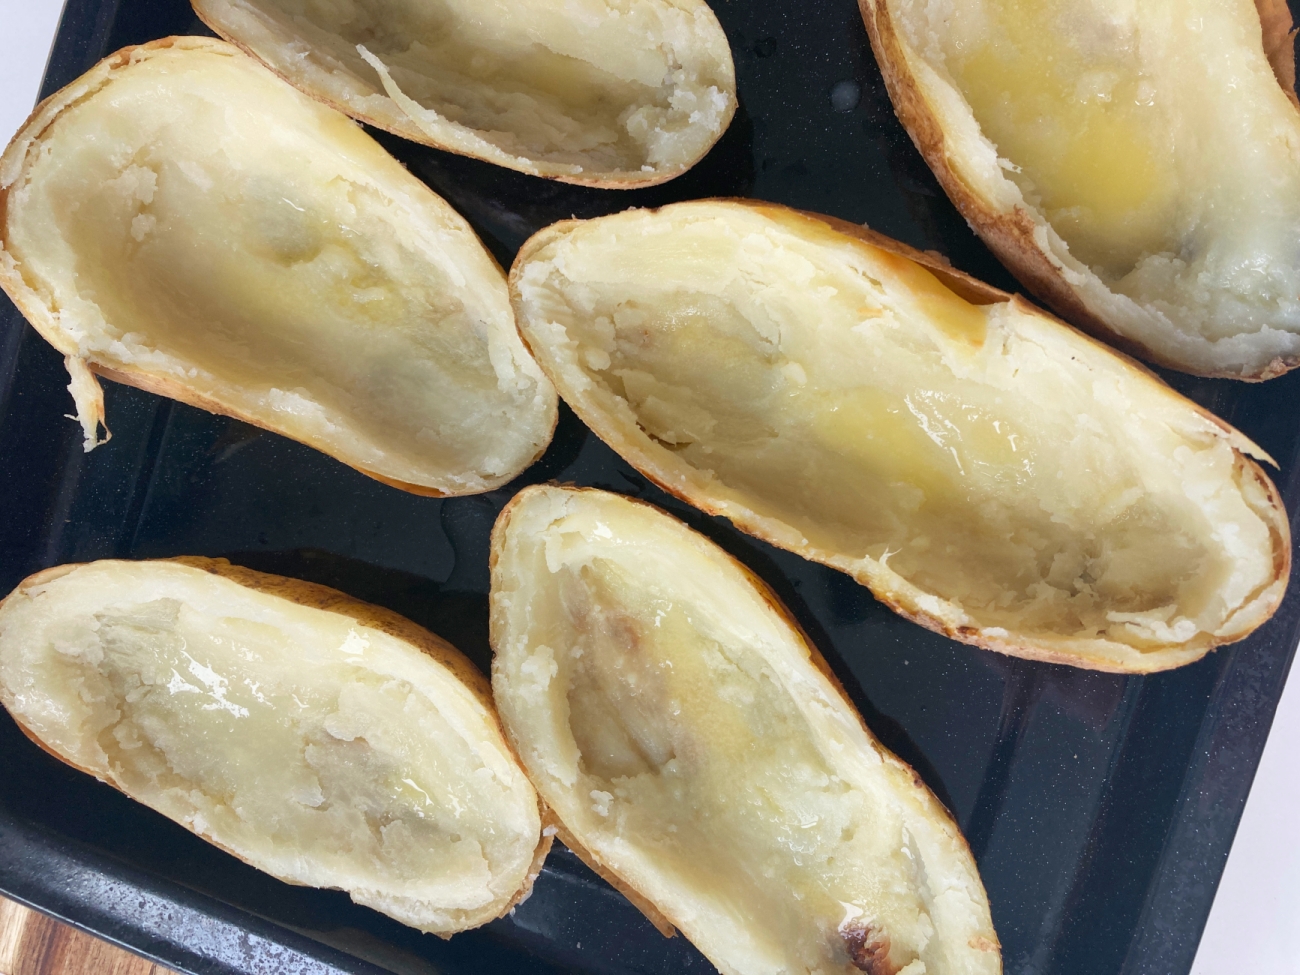 Brush outside and inside of potato skins with remaining butter. Place on baking pan and bake for 10 minutes at 400˚F. Flip skins then bake another 10 minutes. While skins bake prepare gravy to package directions.